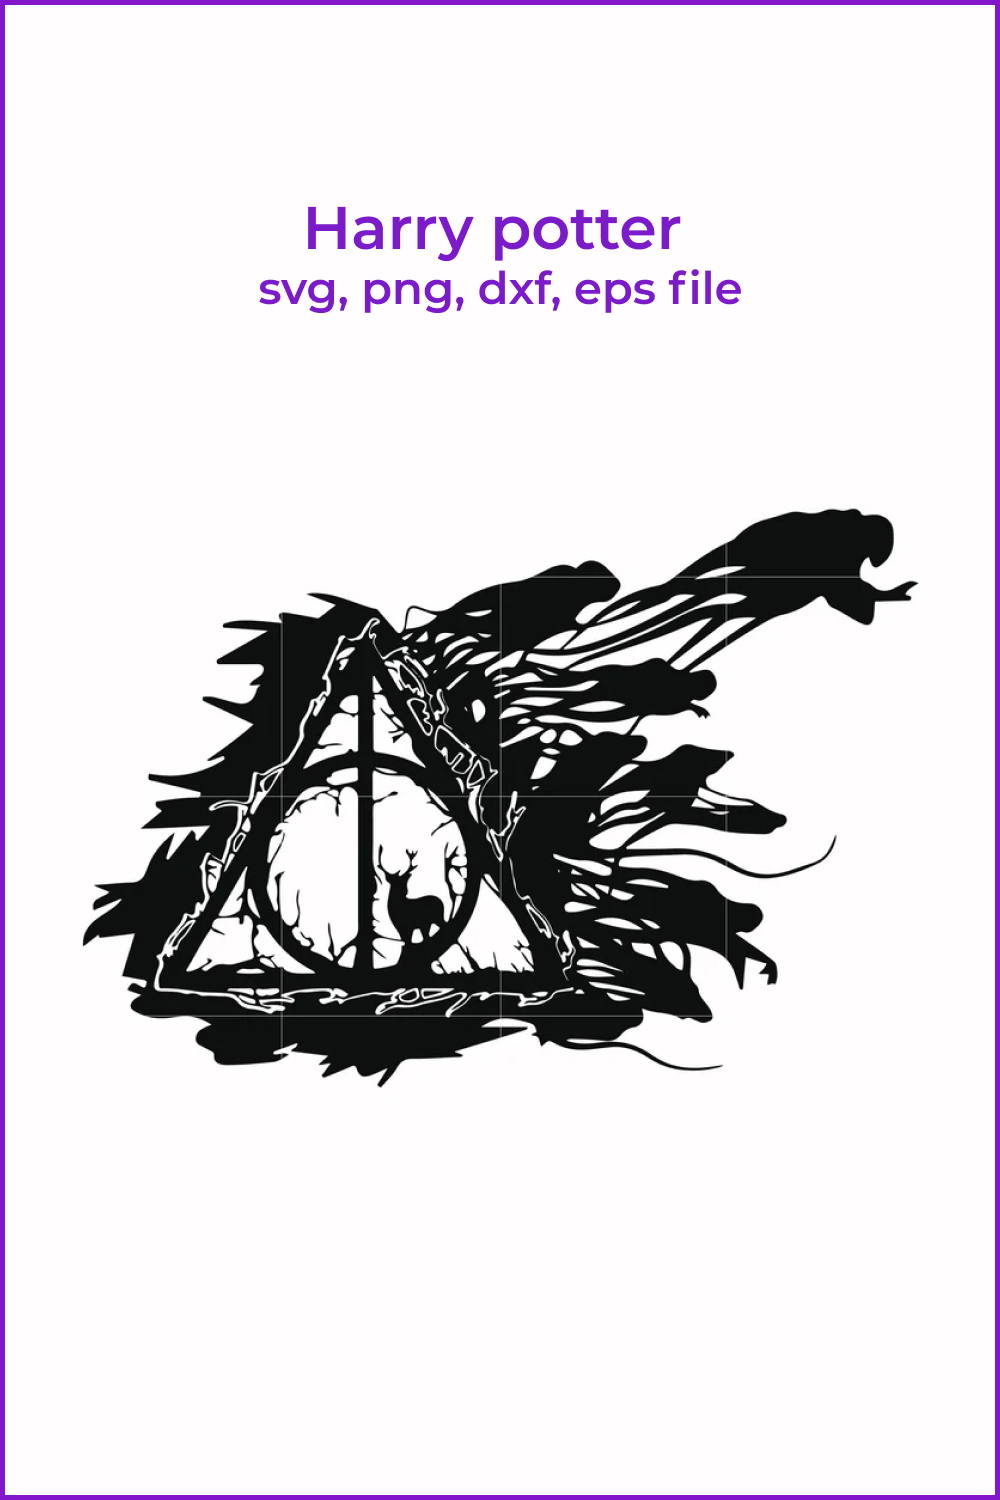 Image of the Deathly Hallows symbol surrounded by Dementors.